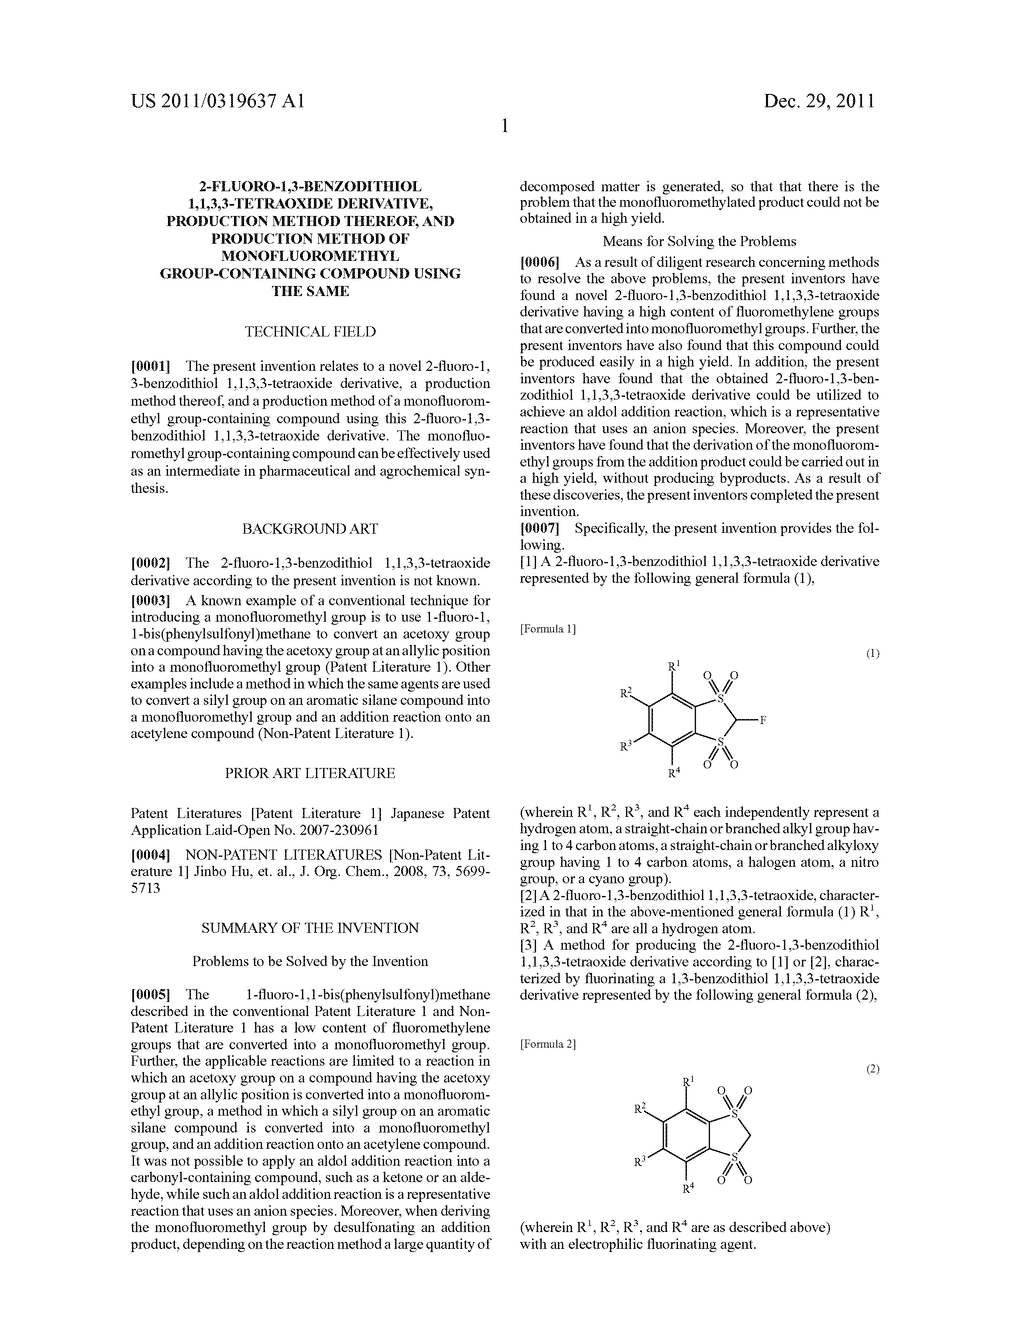 2-FLUORO-1,3-BENZODITHIOL 1,1,3,3-TETRAOXIDE DERIVATIVE, PRODUCTION METHOD     THEREOF, AND PRODUCTION METHOD OF MONOFLUOROMETHYL GROUP-CONTAINING     COMPOUND USING THE SAME - diagram, schematic, and image 02